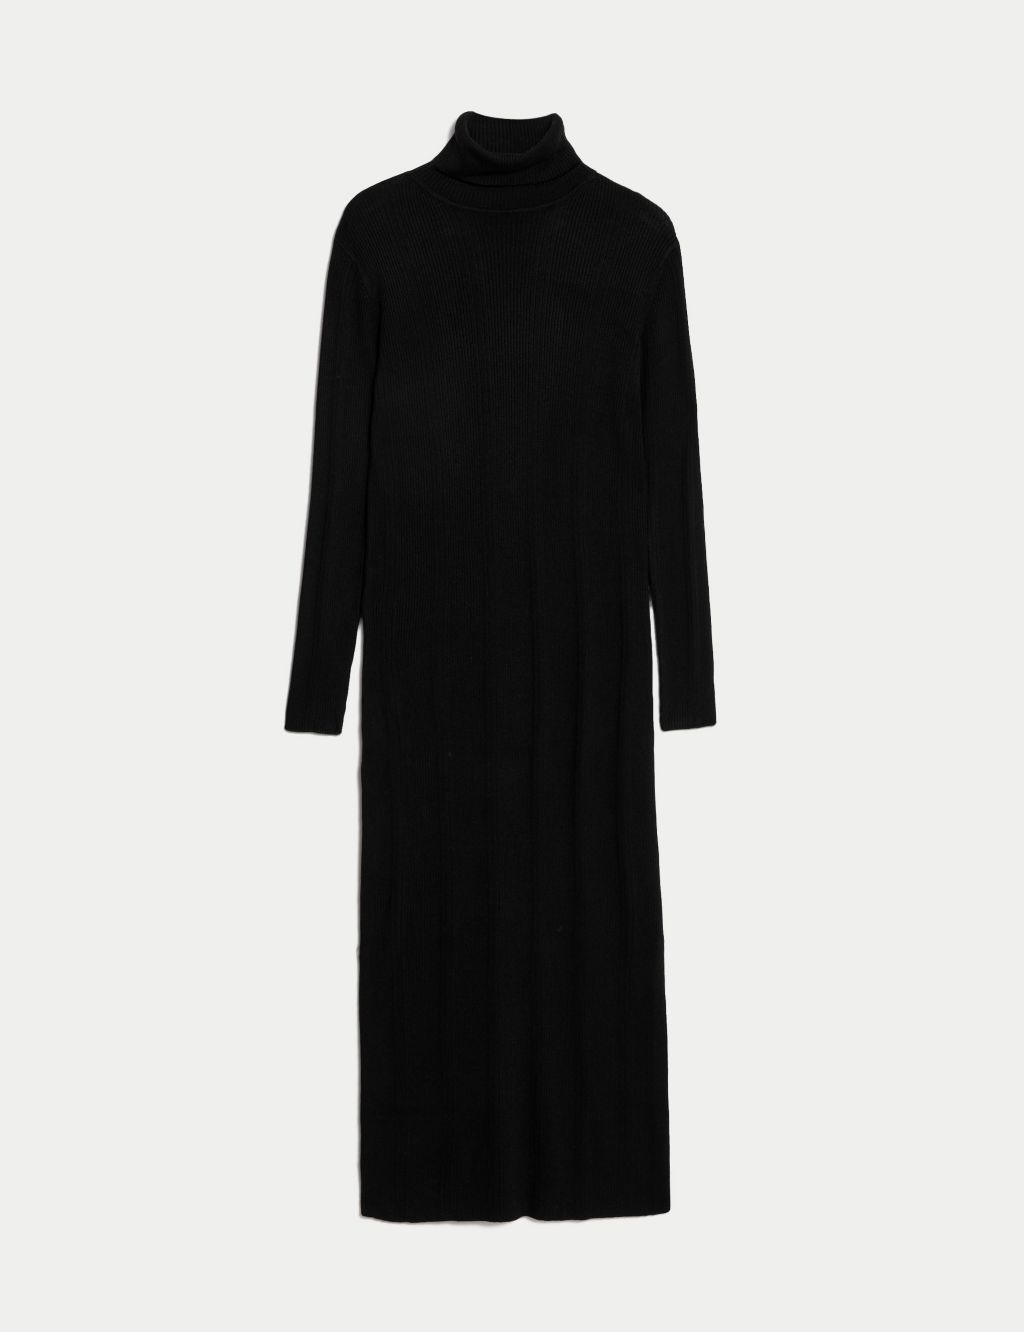 Knitted Ribbed Roll Neck Midi Dress image 2